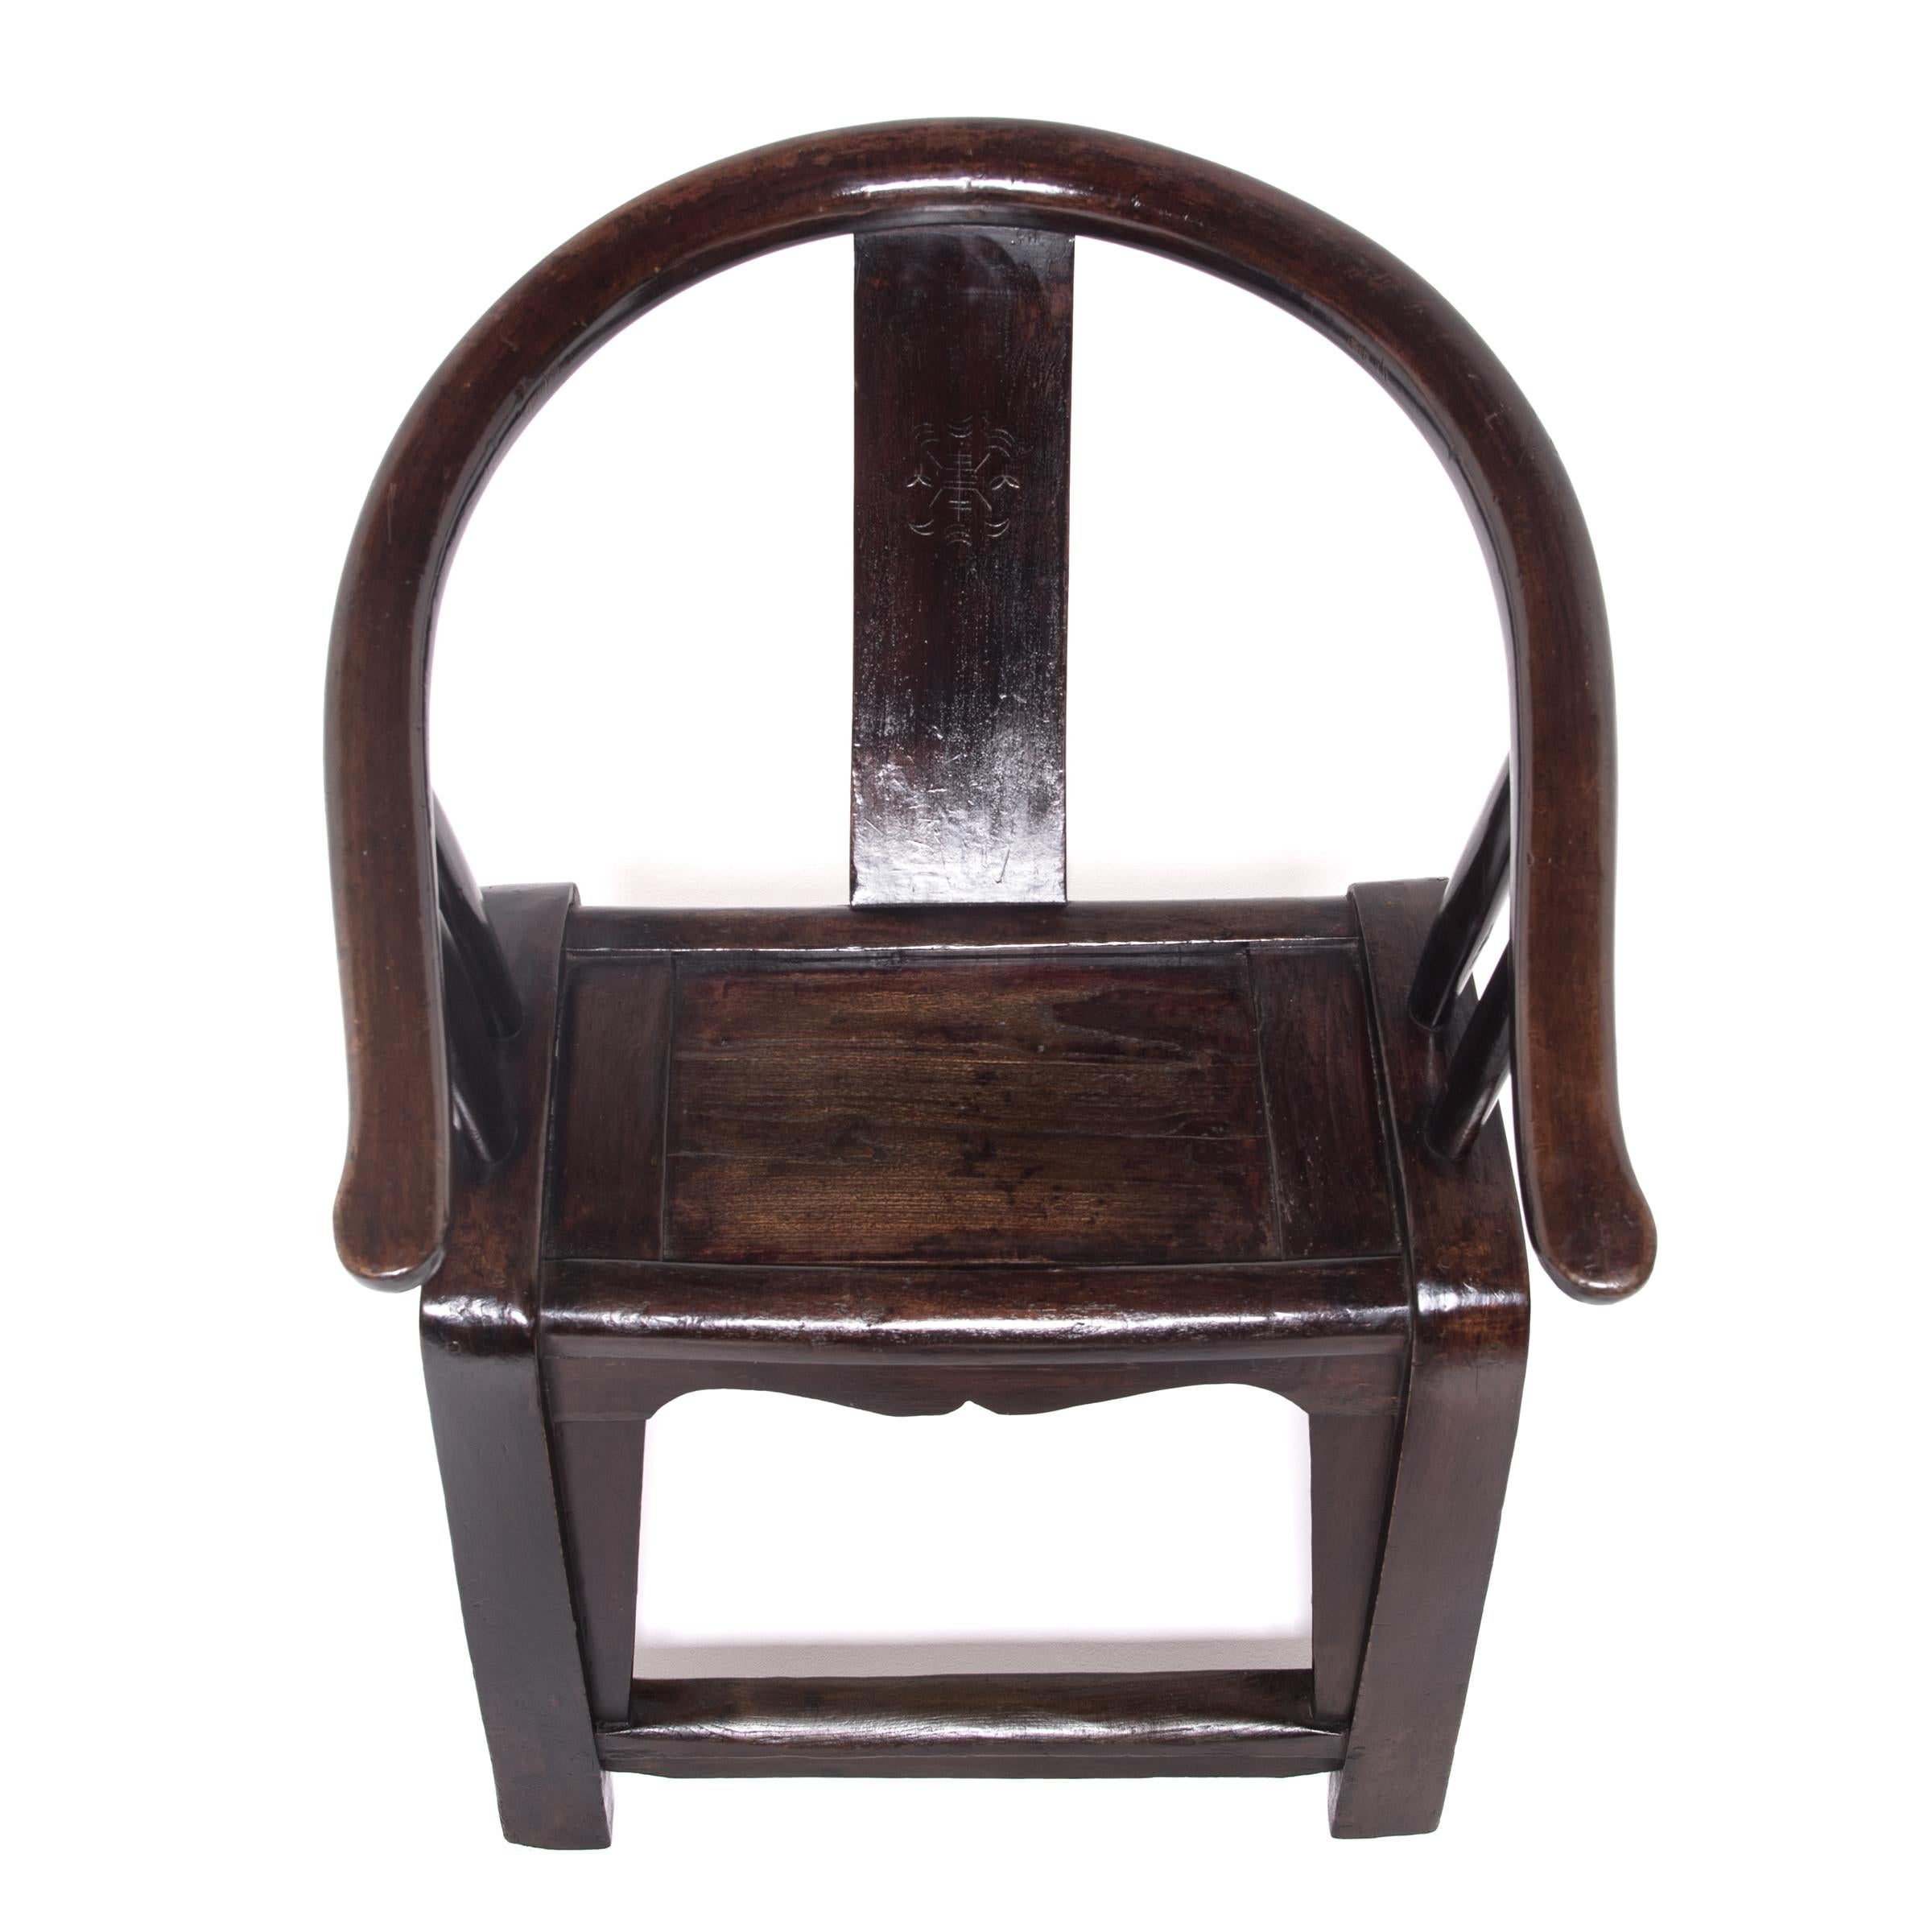 Provincial Chinese Roundback Chair, c. 1850 In Good Condition For Sale In Chicago, IL